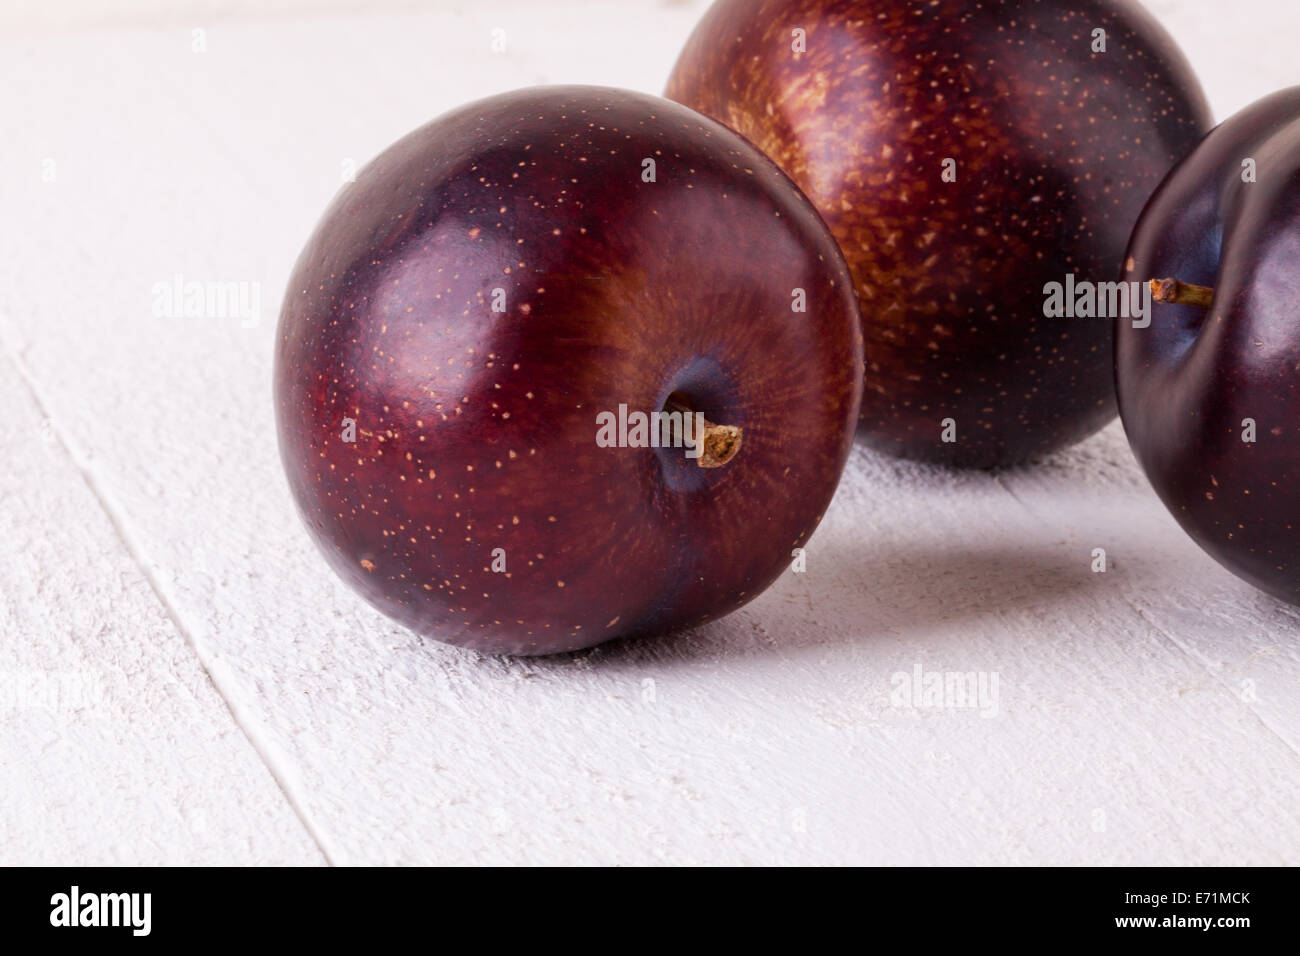 Fresh ripe red juicy appetizing plum close up view with the stalk facing the camera in a concept of healthy eating and diet with Stock Photo